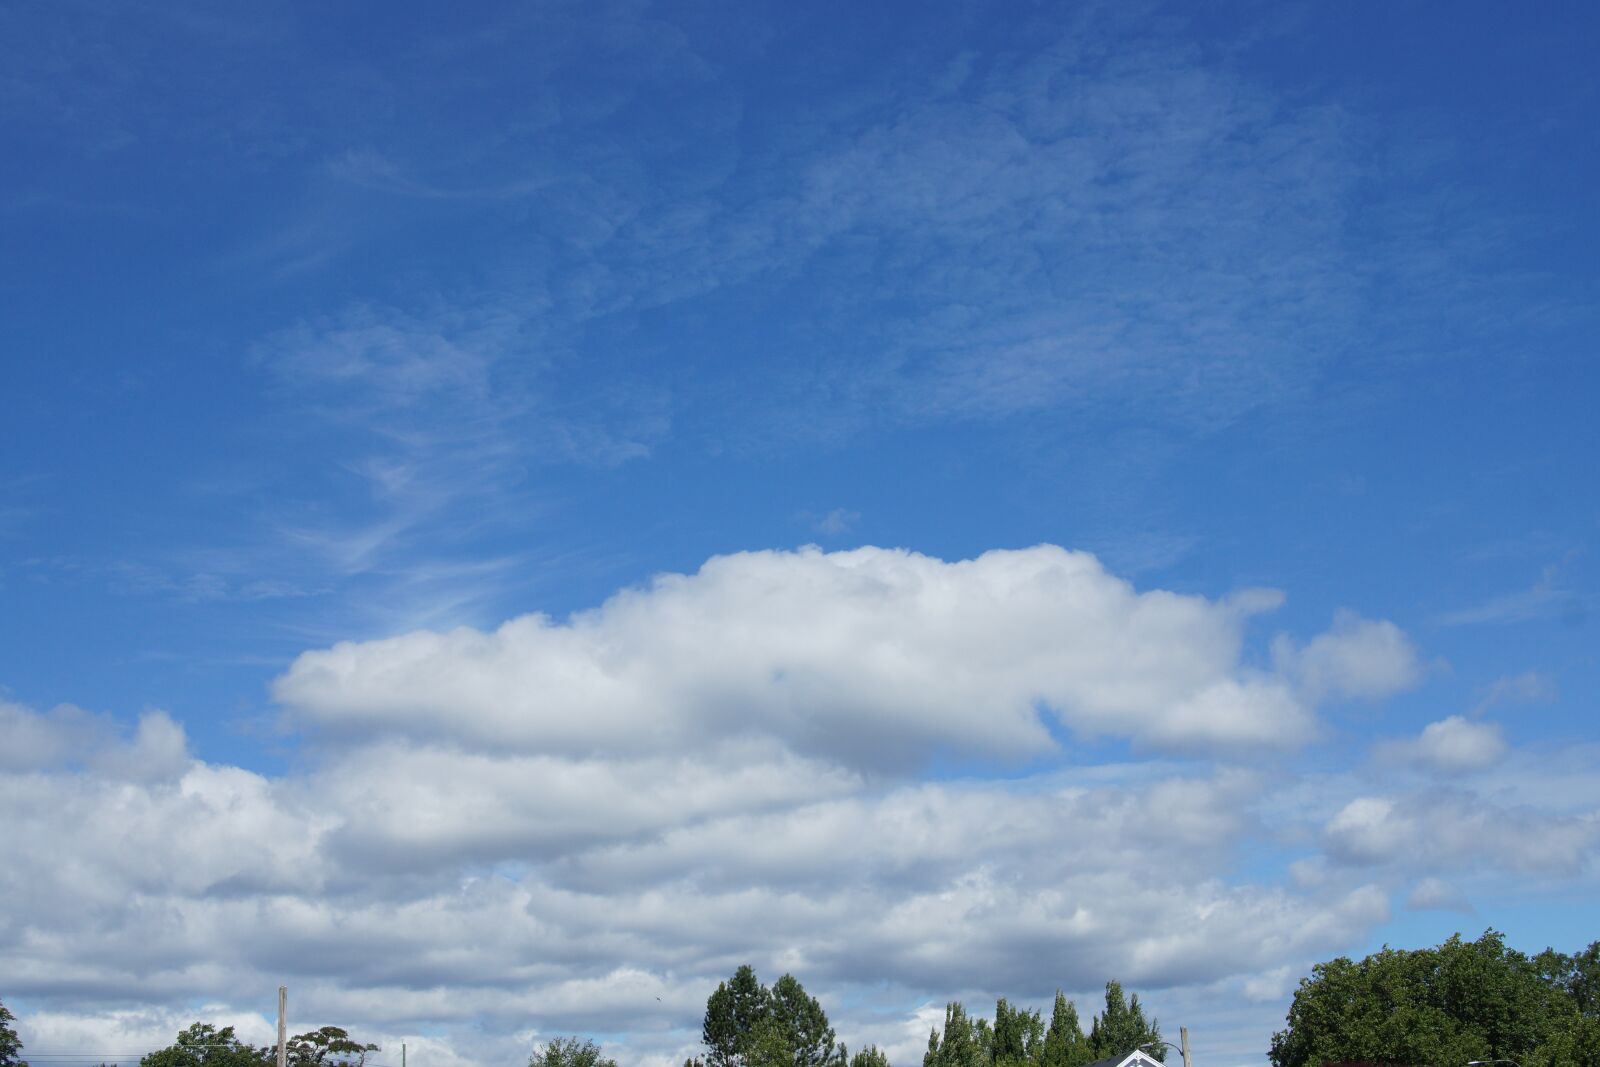 28-75mm F2.8 SAM sample photo. Clouds, sky, nature photography